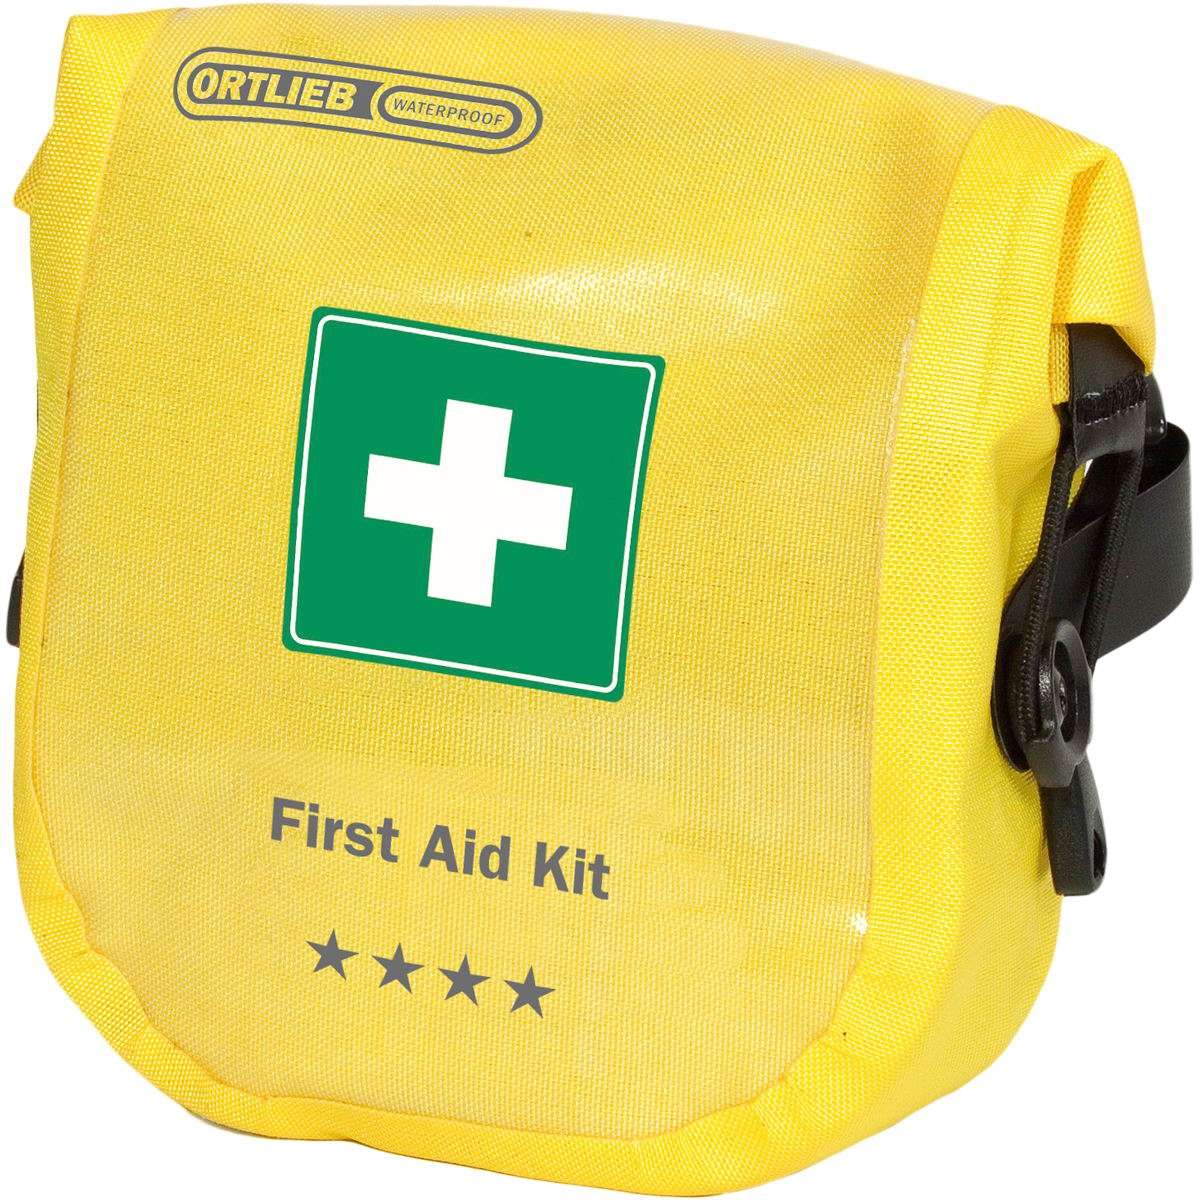 ORTLIEB First Aid Kit Safety Level Medium Yellow